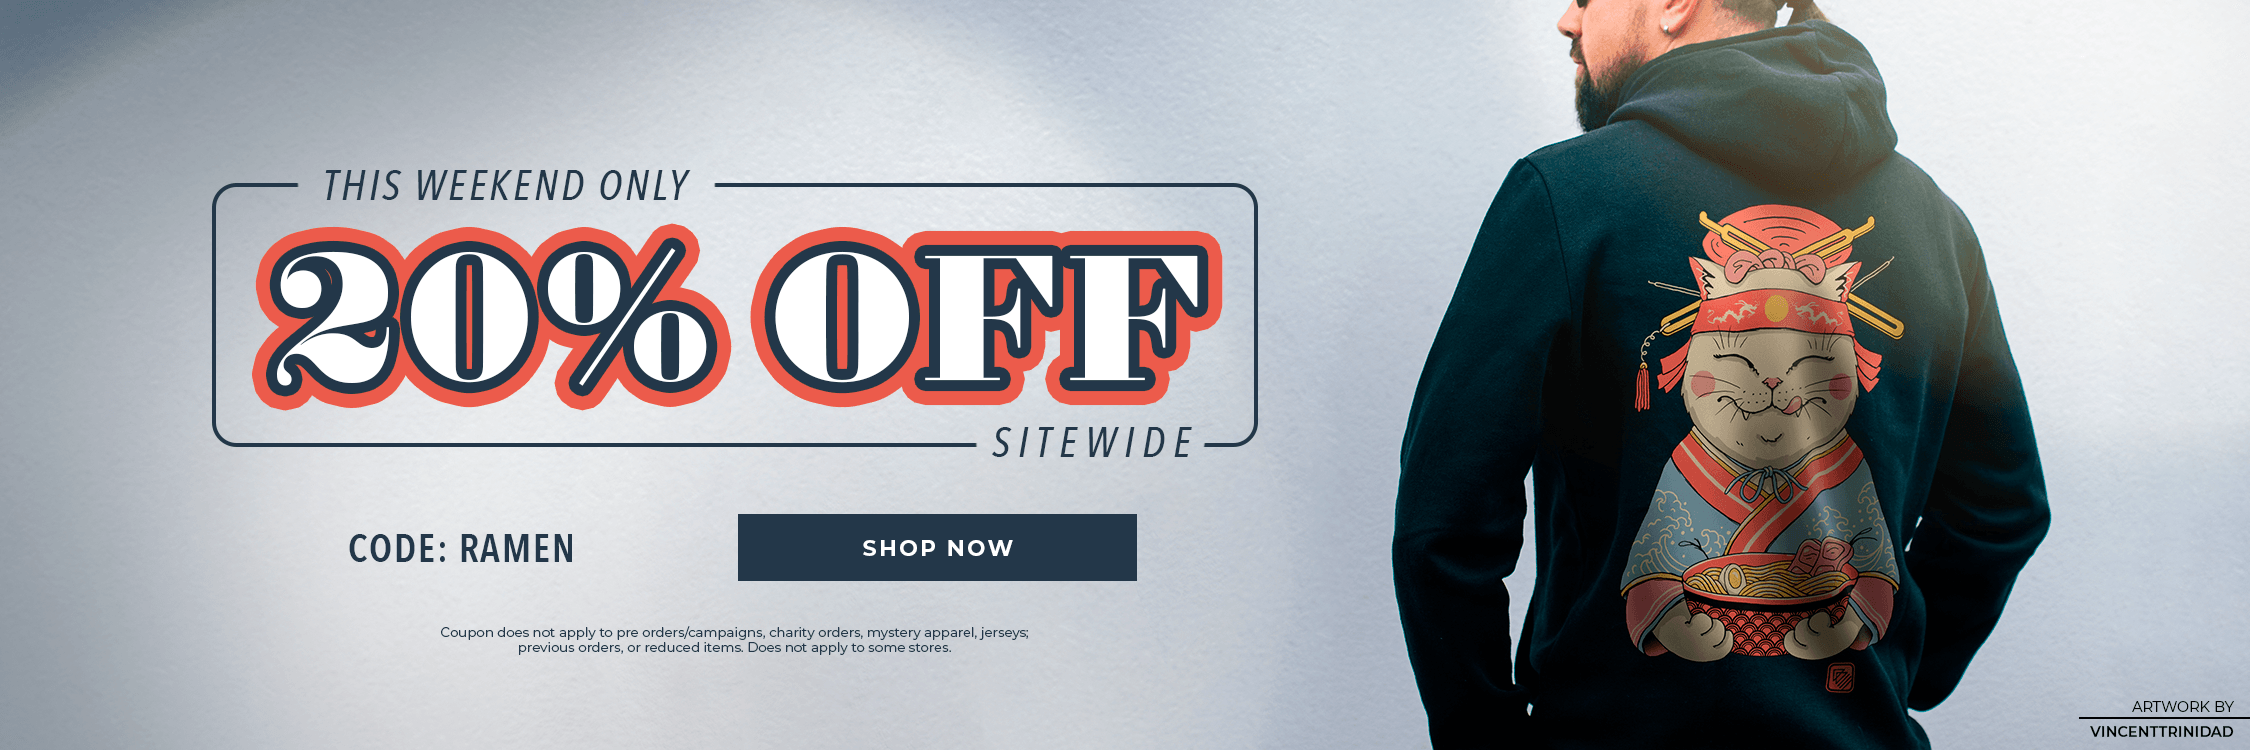 This Weekend 20% Off Sitewide. Code RAMEN. Shop Now. Exclusions Apply. Man wearing cat pullover.